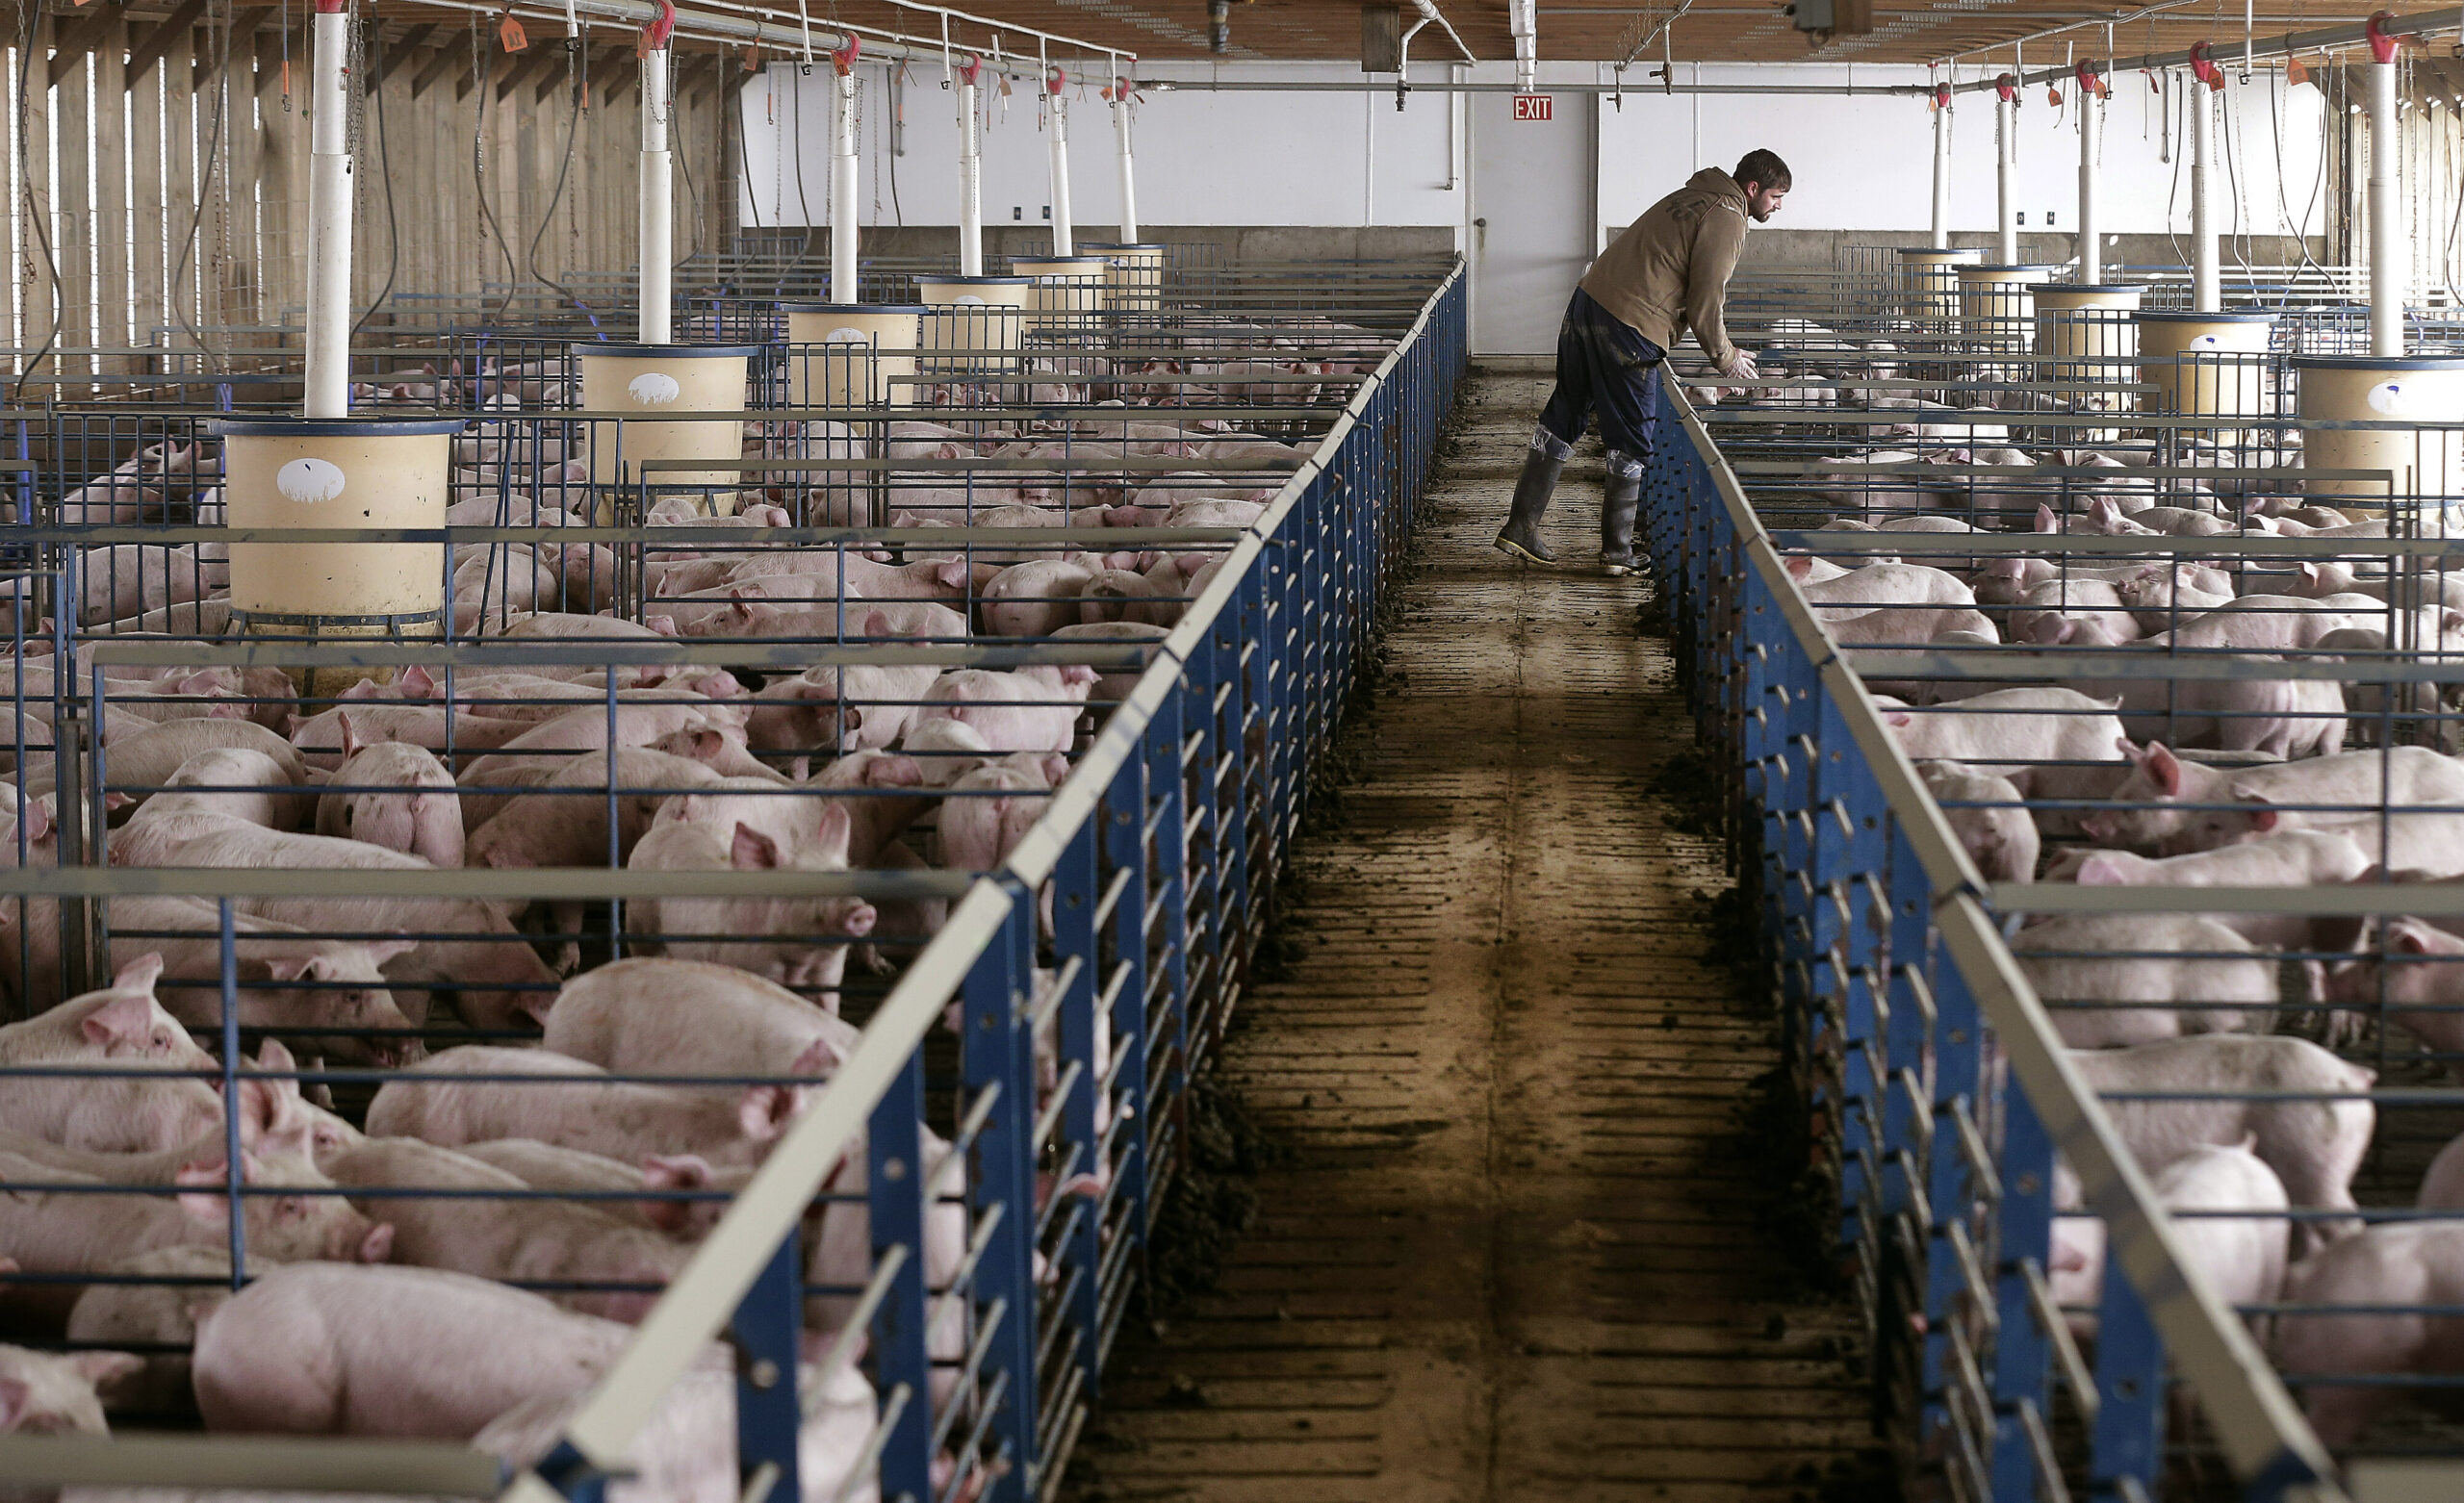 A man inside a barn with many pigs